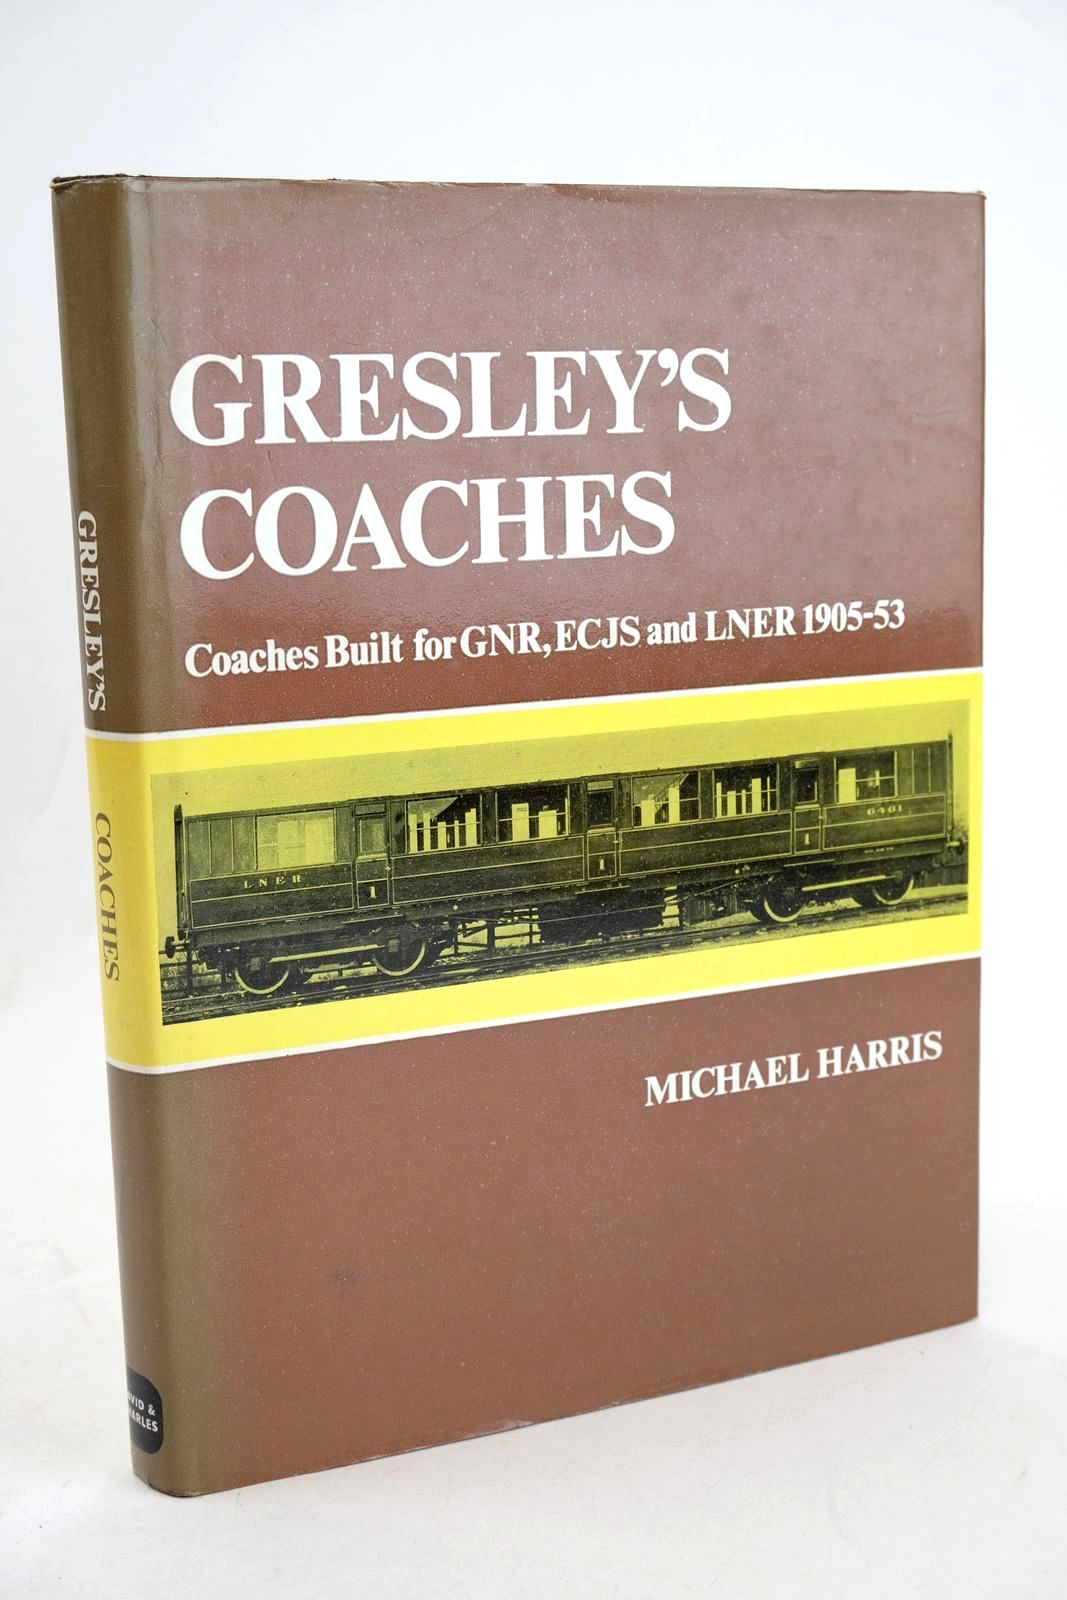 Photo of GRESLEY'S COACHES: COACHES BUILT FOR GNR, ECJS AND LNER 1905-53- Stock Number: 1327411